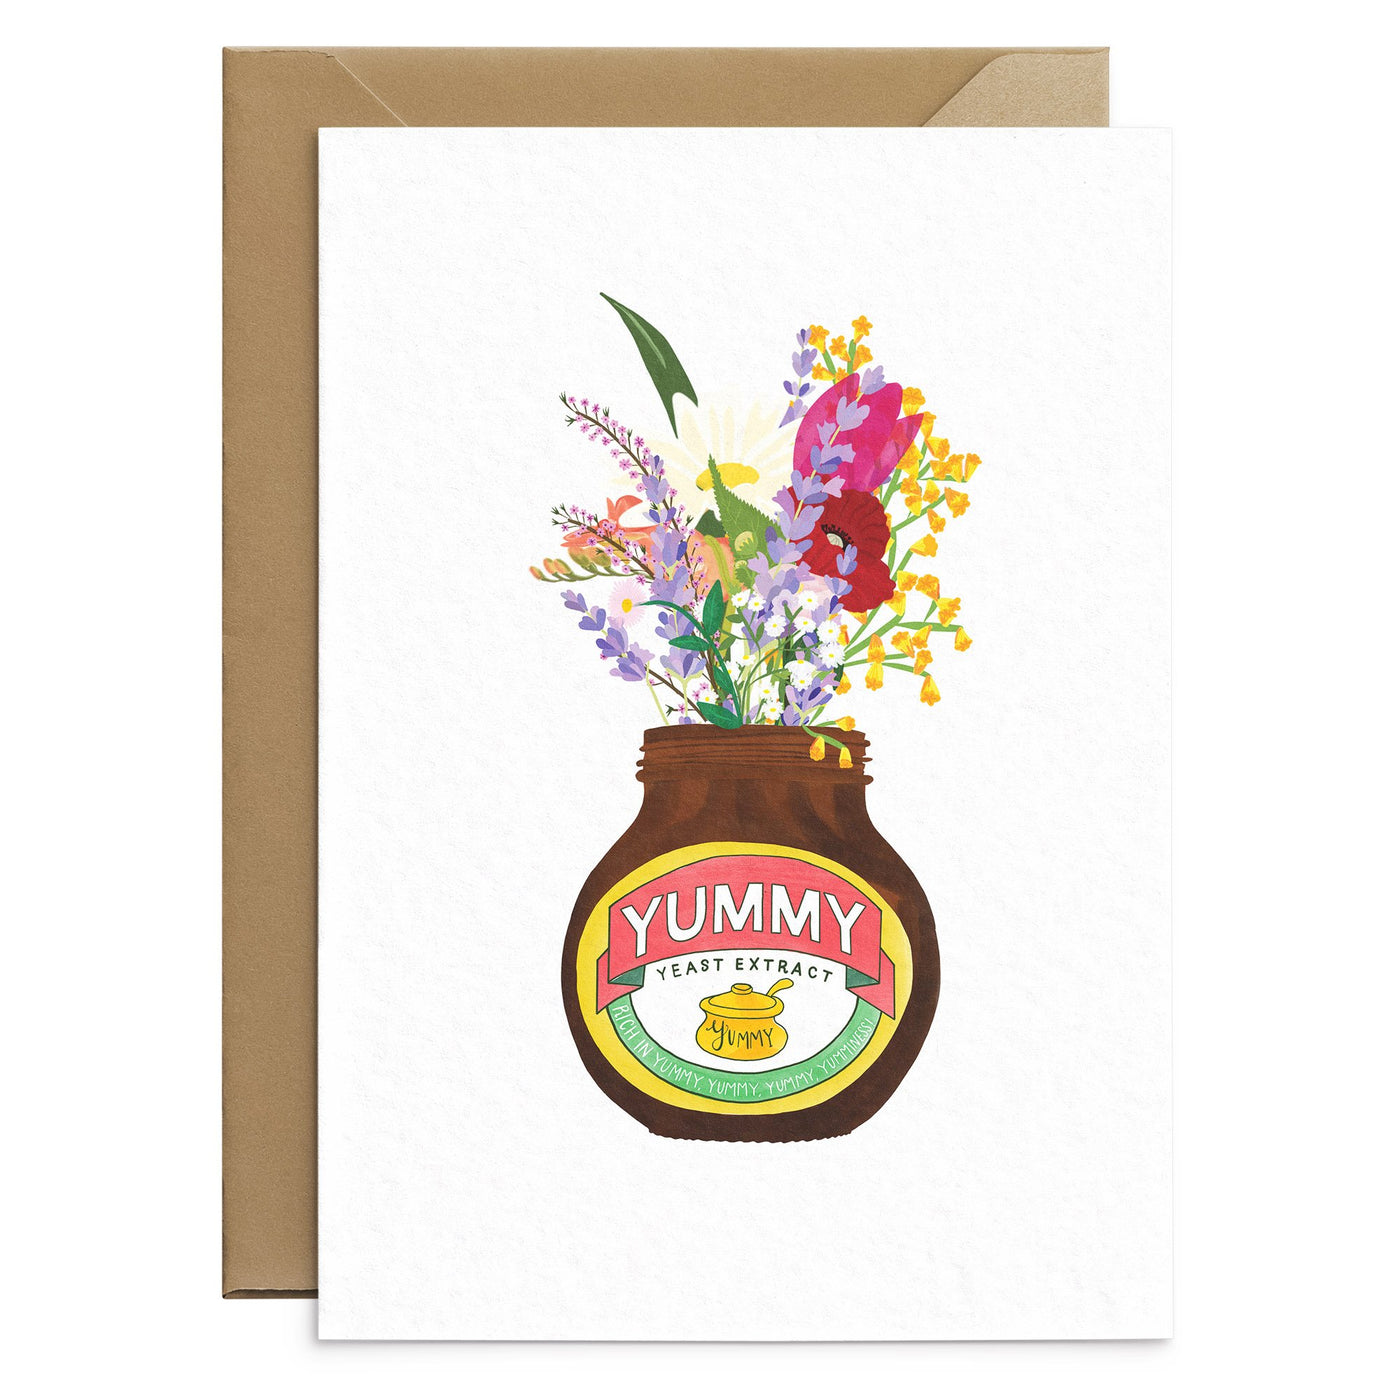 Yummy Yeast Extract Jar & Flowers Card - Poppins & Co.